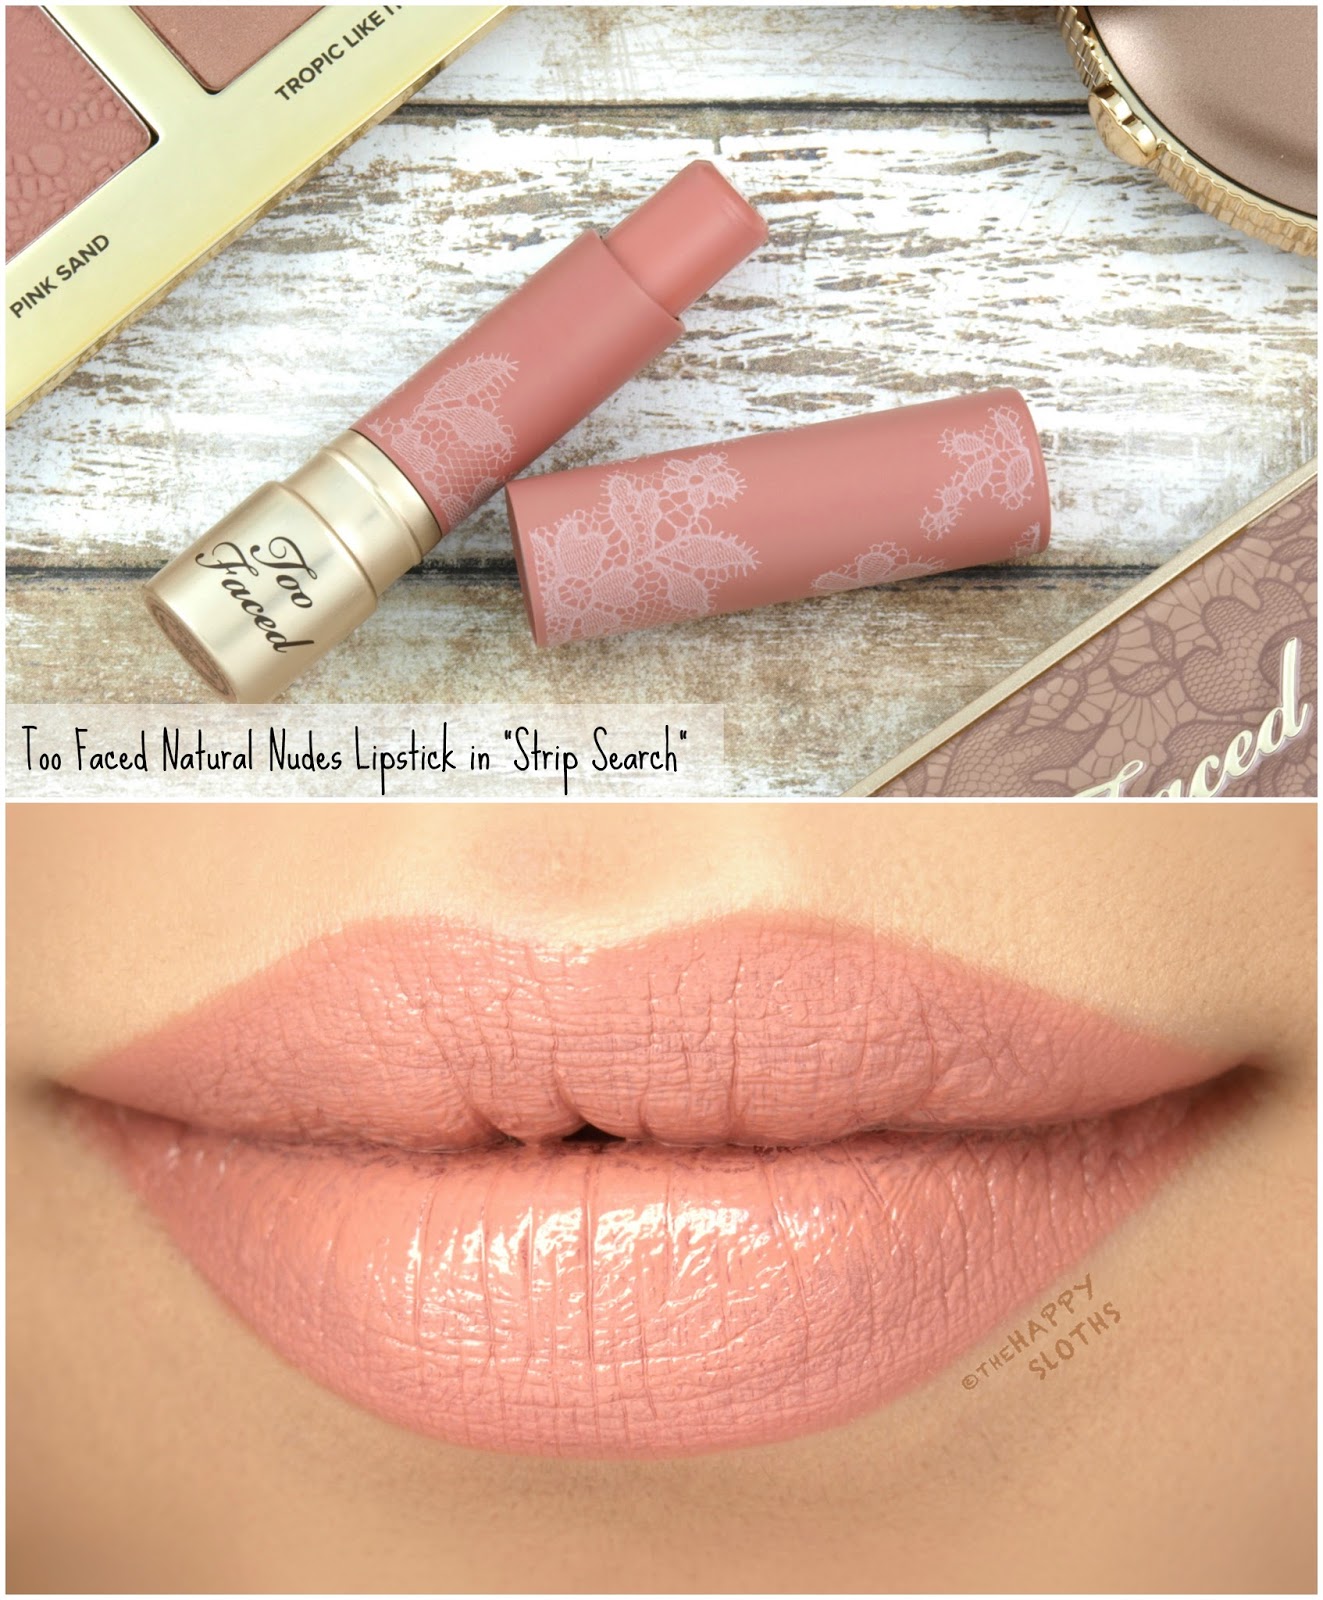 Too Faced | Natural Nudes Lipstick in "Strip Search": Review and Swatches